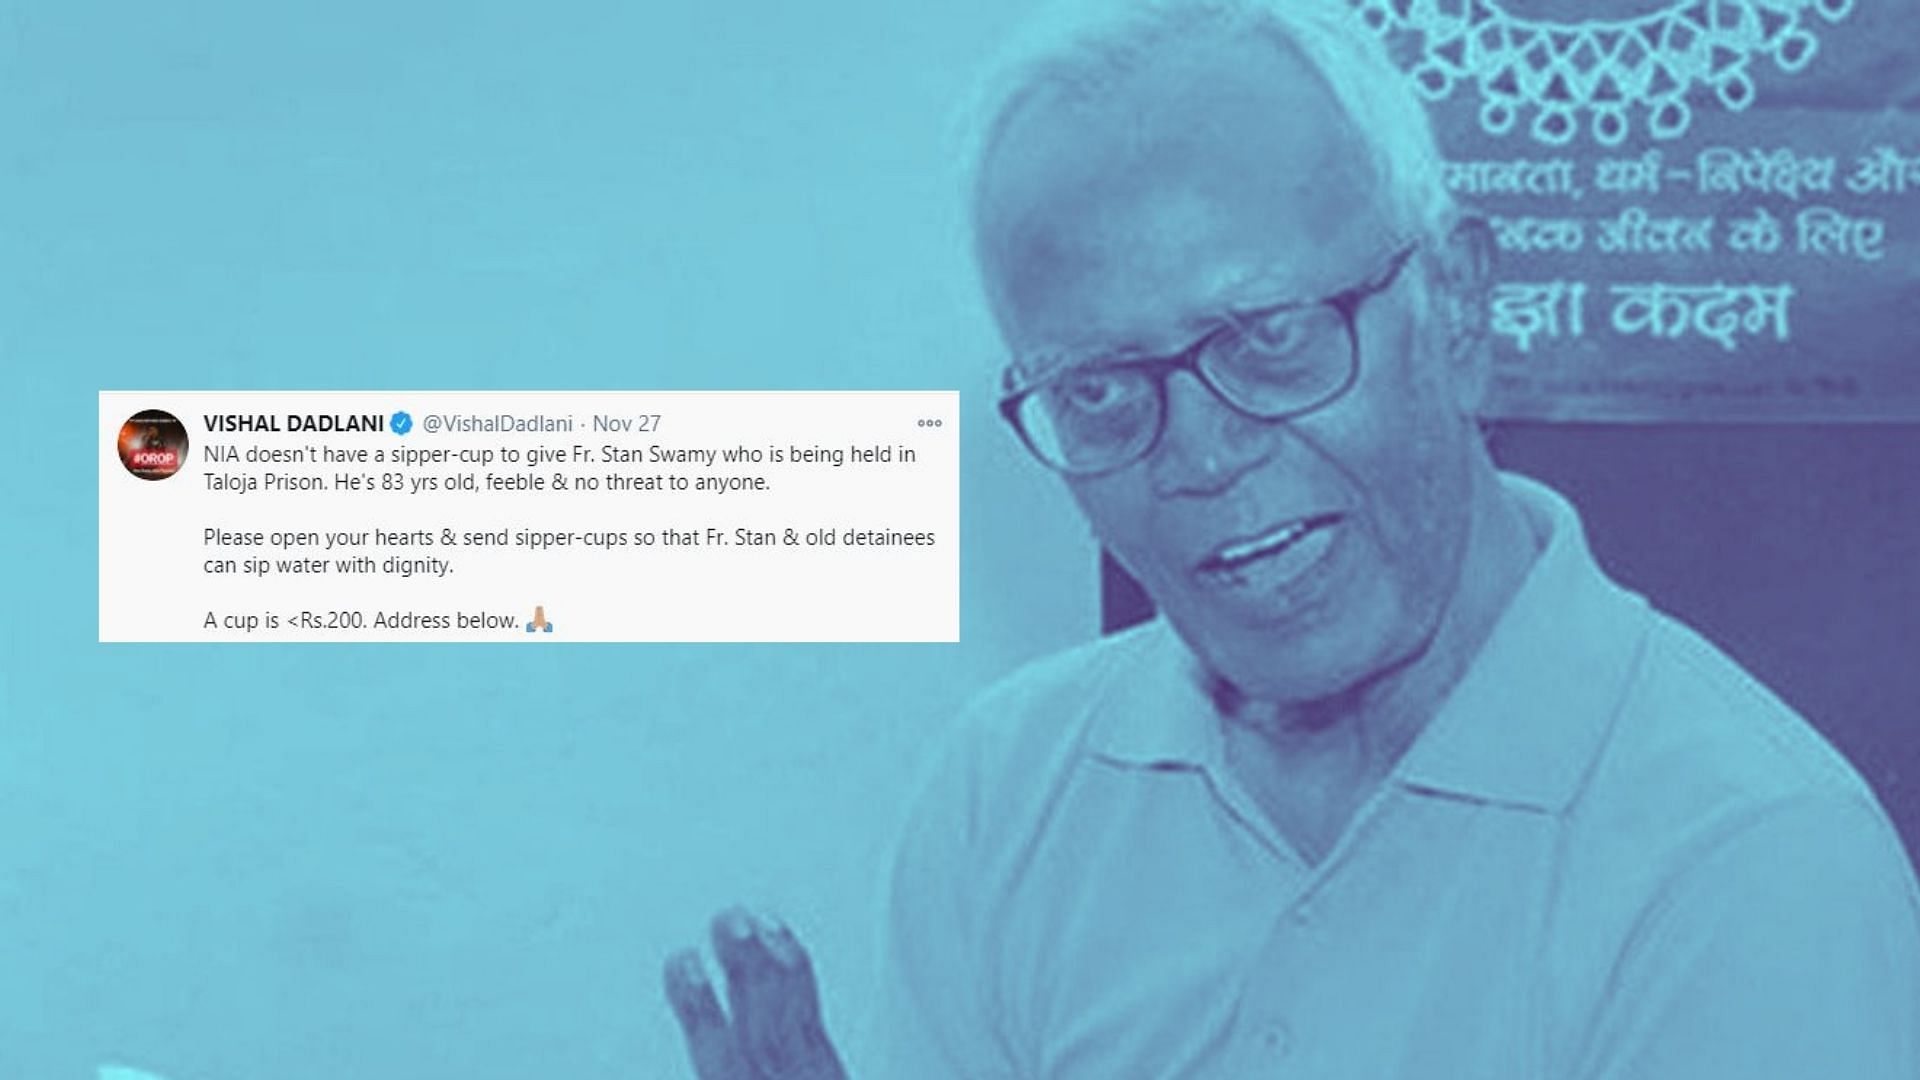 83-year-old Stan Swamy, a Parkinson’s patient, has been demanding for a sipper and a straw for over 20 days.